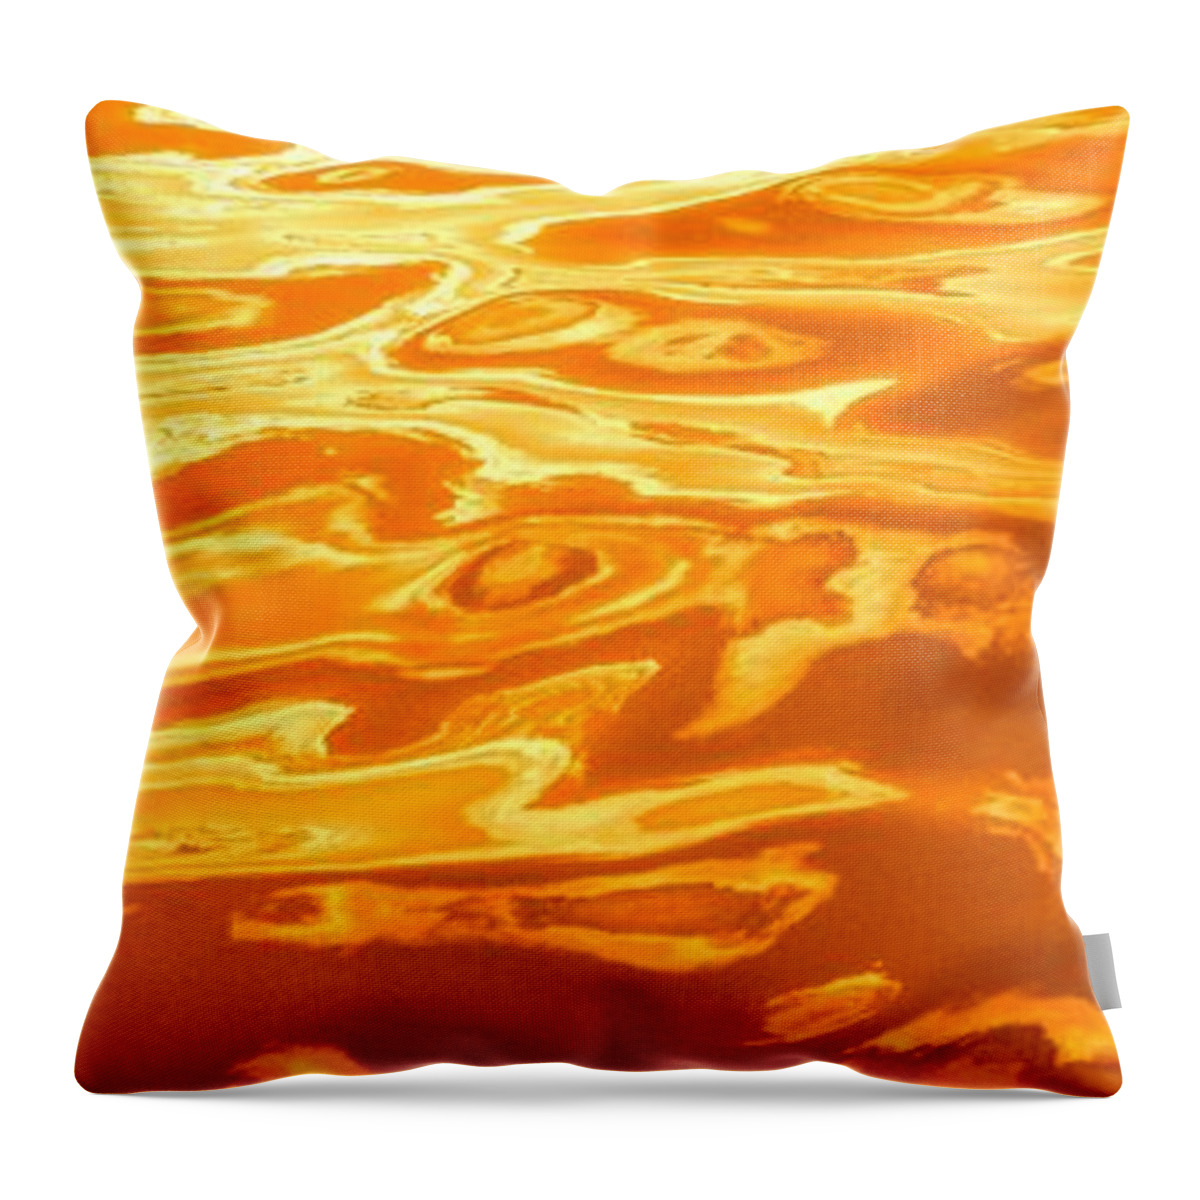 Wall Art Throw Pillow featuring the photograph Colored Wave Long Orange by Stephen Jorgensen